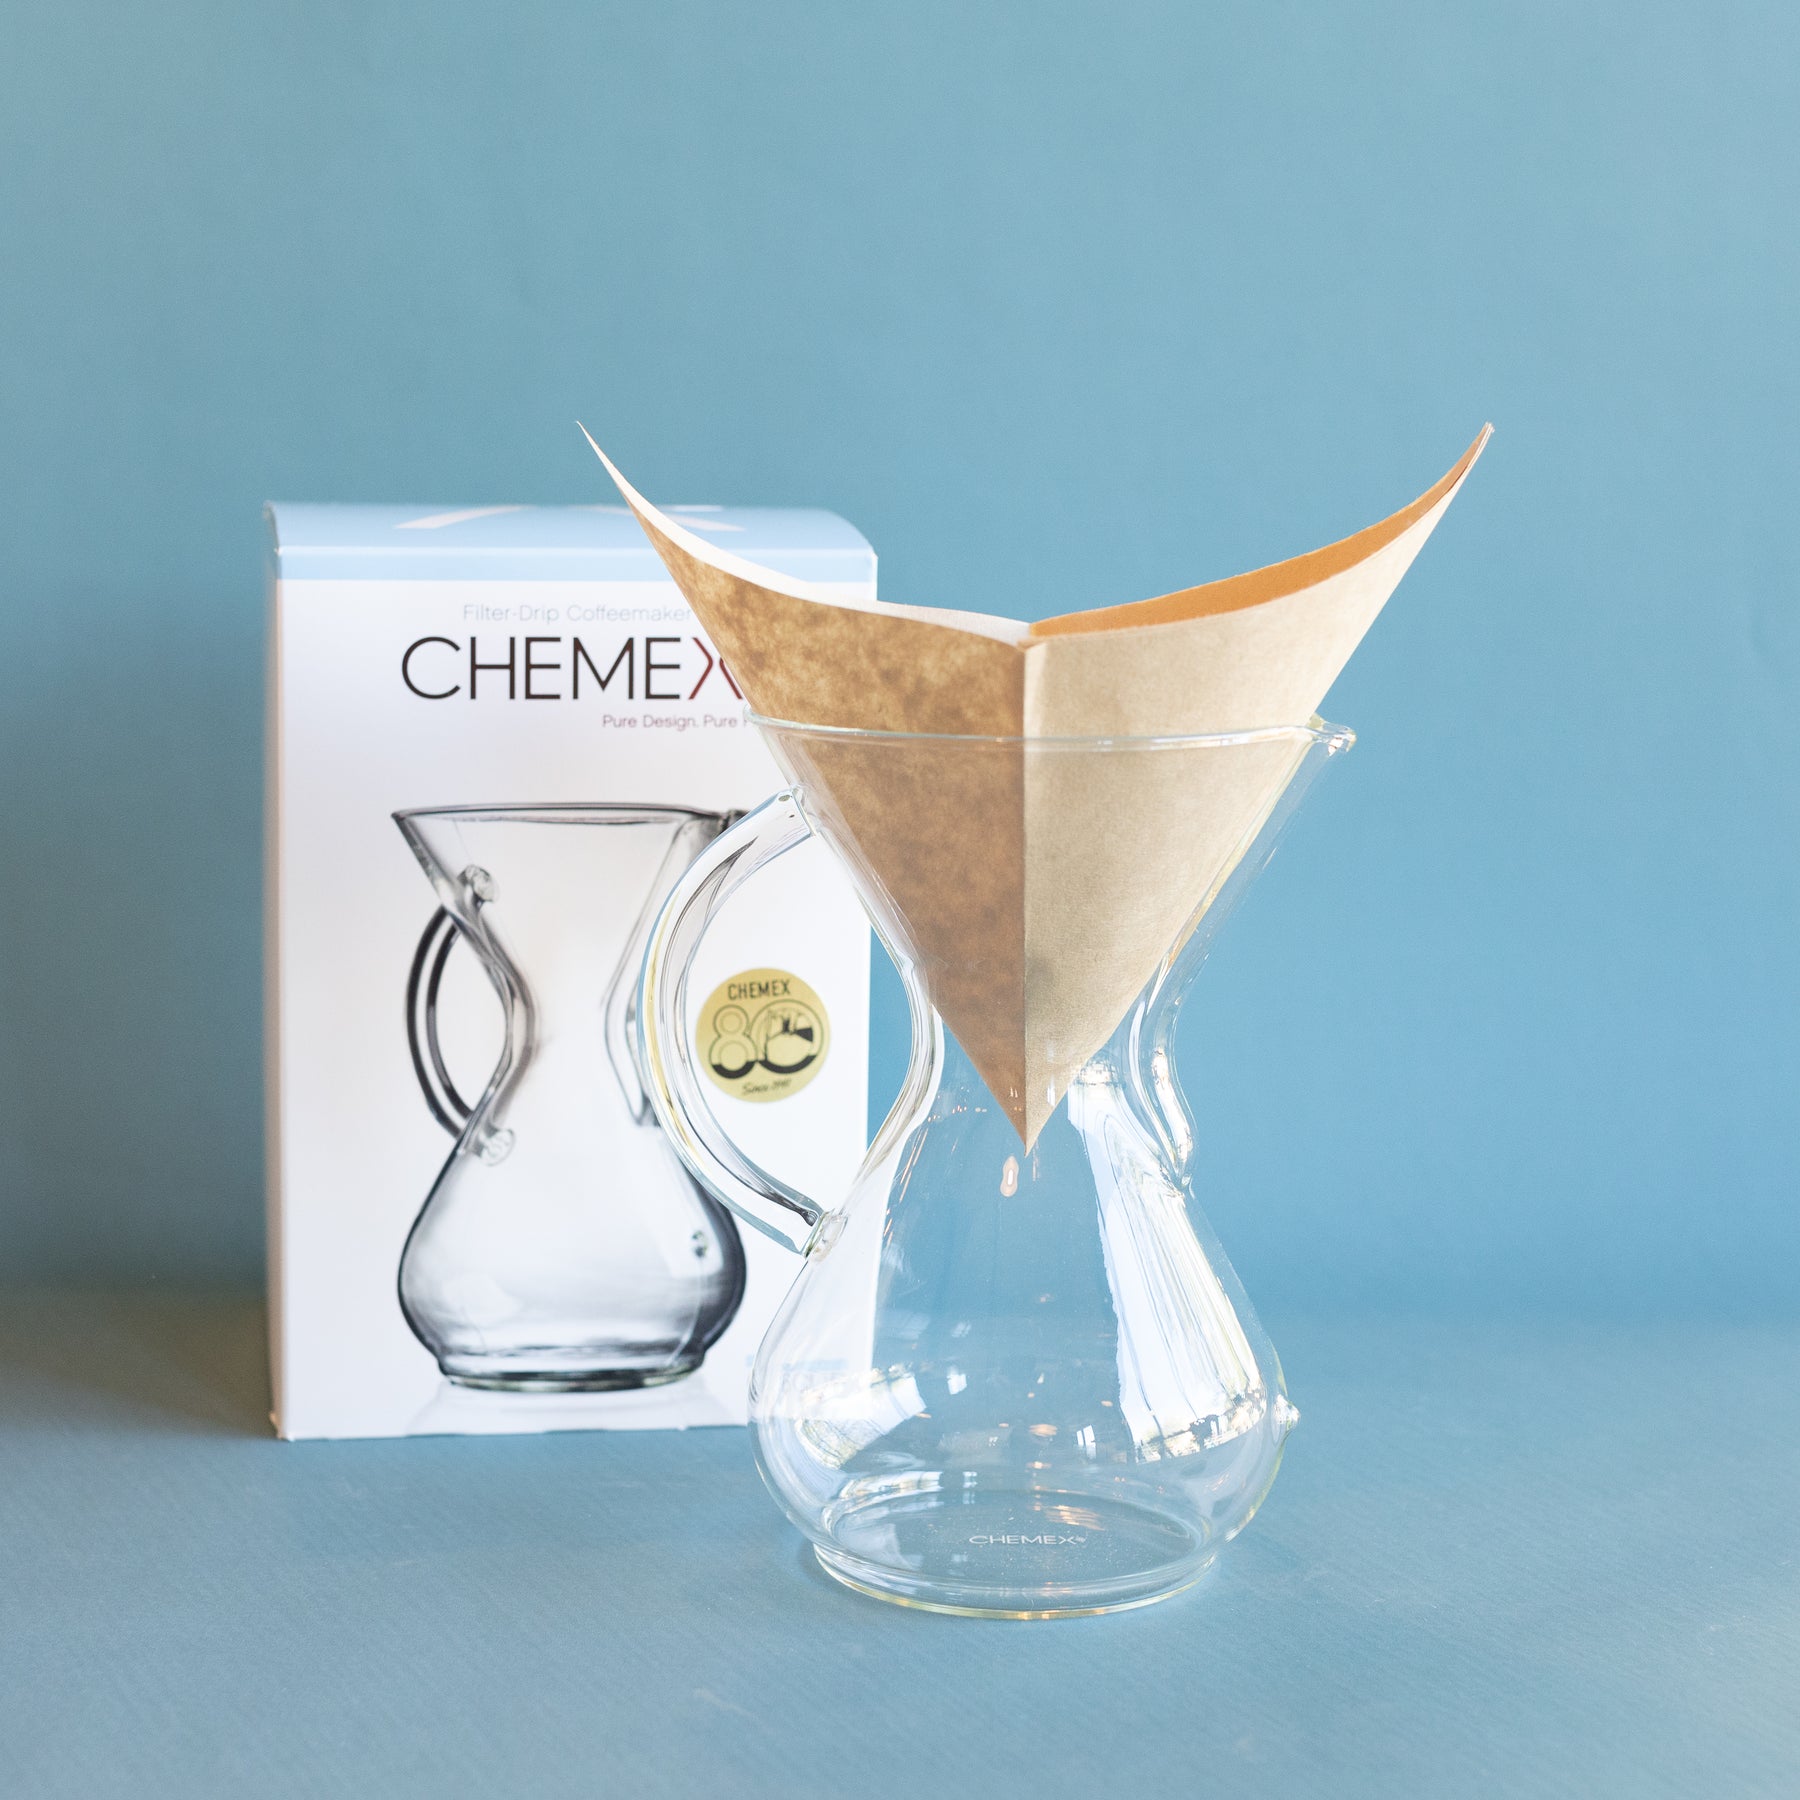 Chemex - 3 Cup, 6 Cup, 8 Cup — Snowy Owl Coffee Roasters